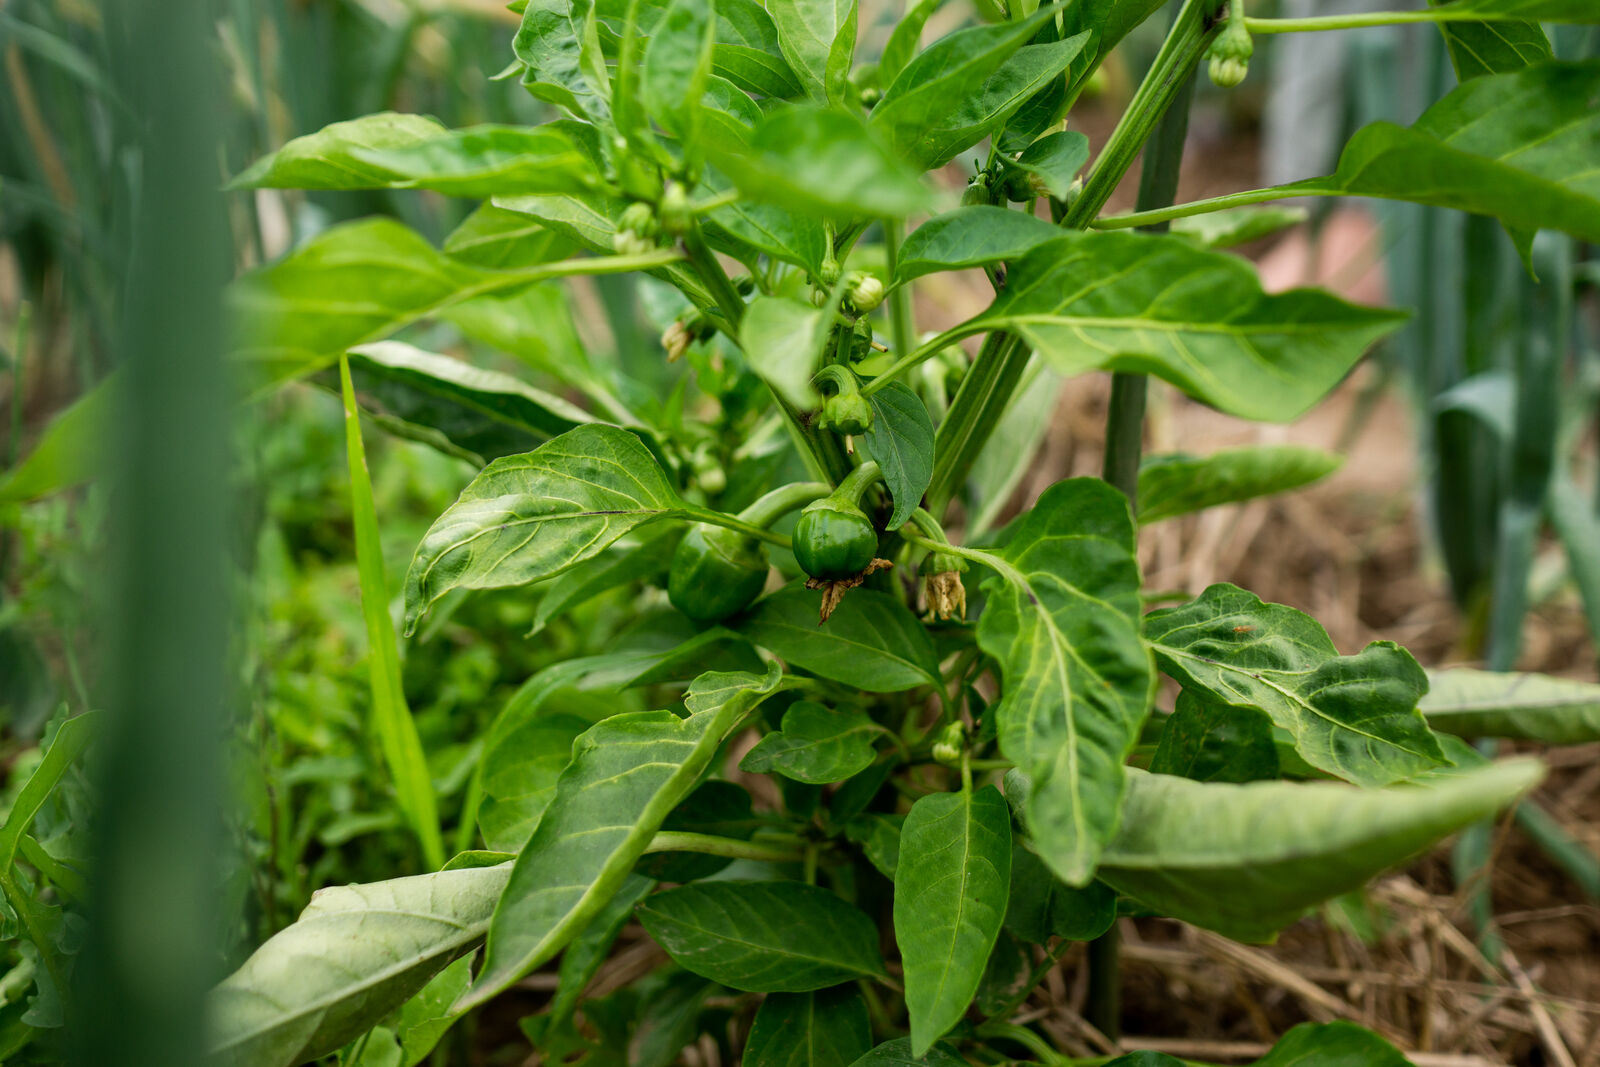 Peppers outdoors in mixed cultivation with cucumber